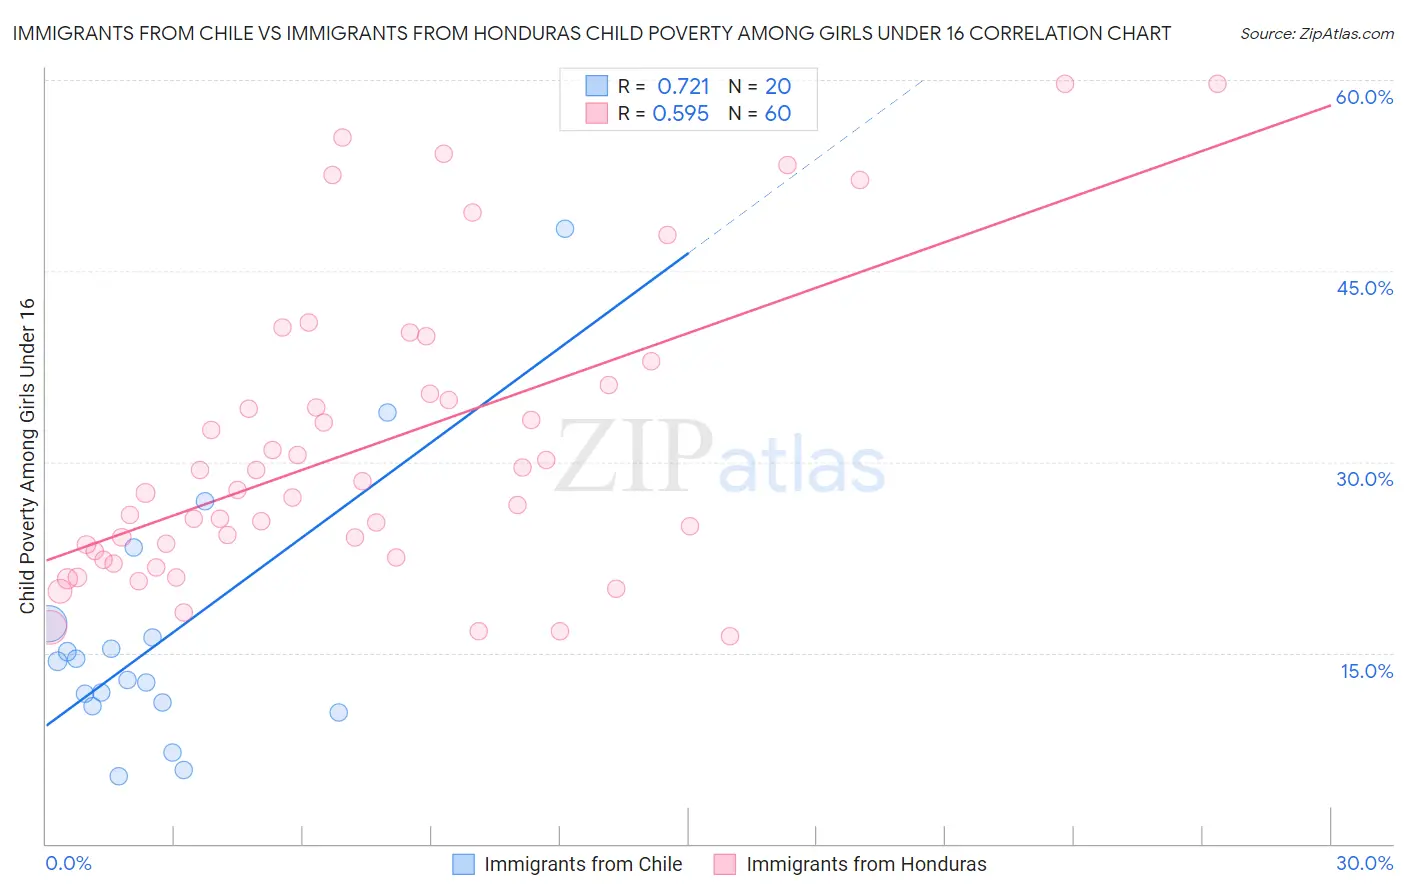 Immigrants from Chile vs Immigrants from Honduras Child Poverty Among Girls Under 16